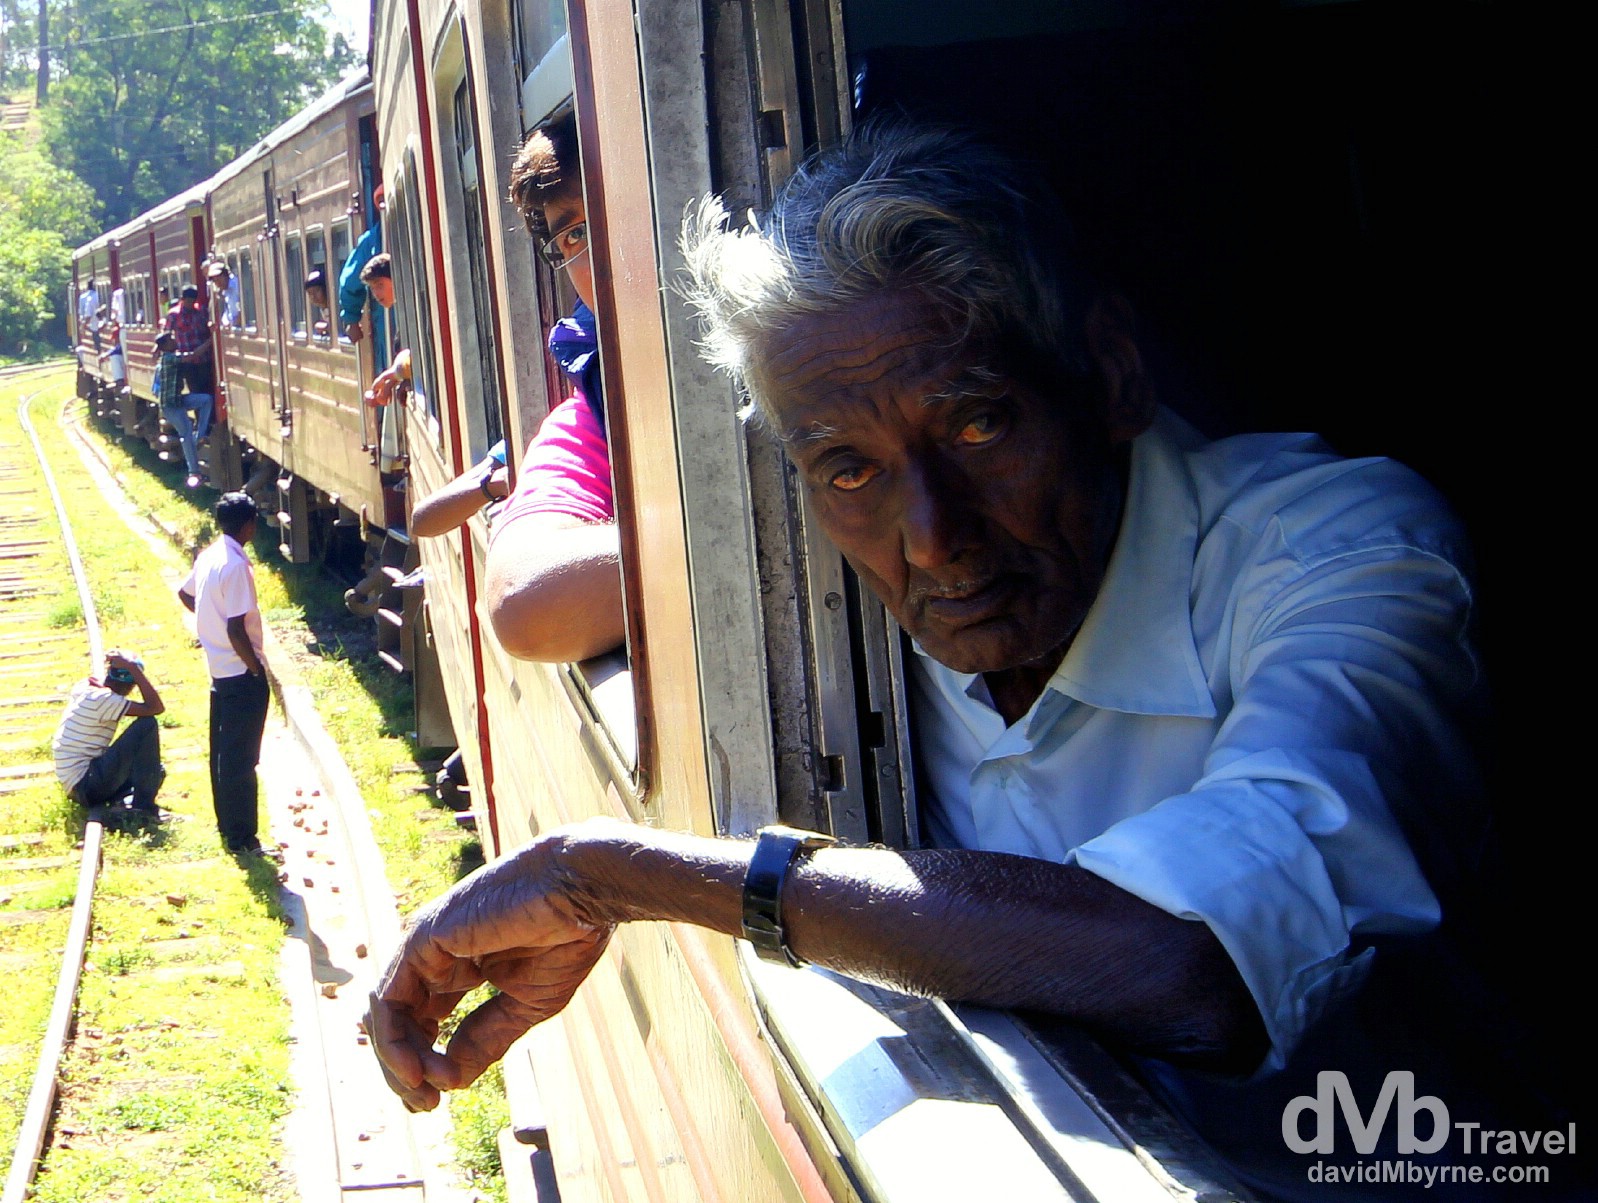 Waiting out a delay on the Badulla to Colombo train in central Sri Lanka. September 5th 2012.